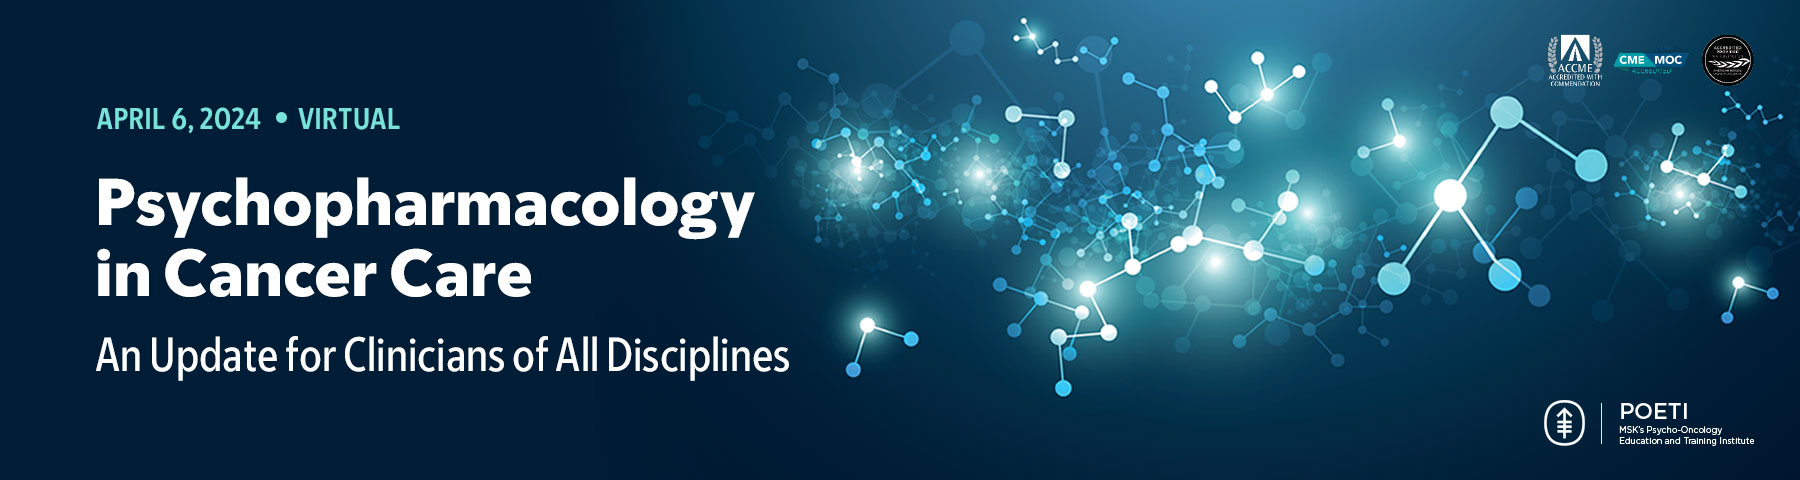 2023 Psychopharmacology in Cancer Care: An Update for Clinicians of All Disciplines Banner